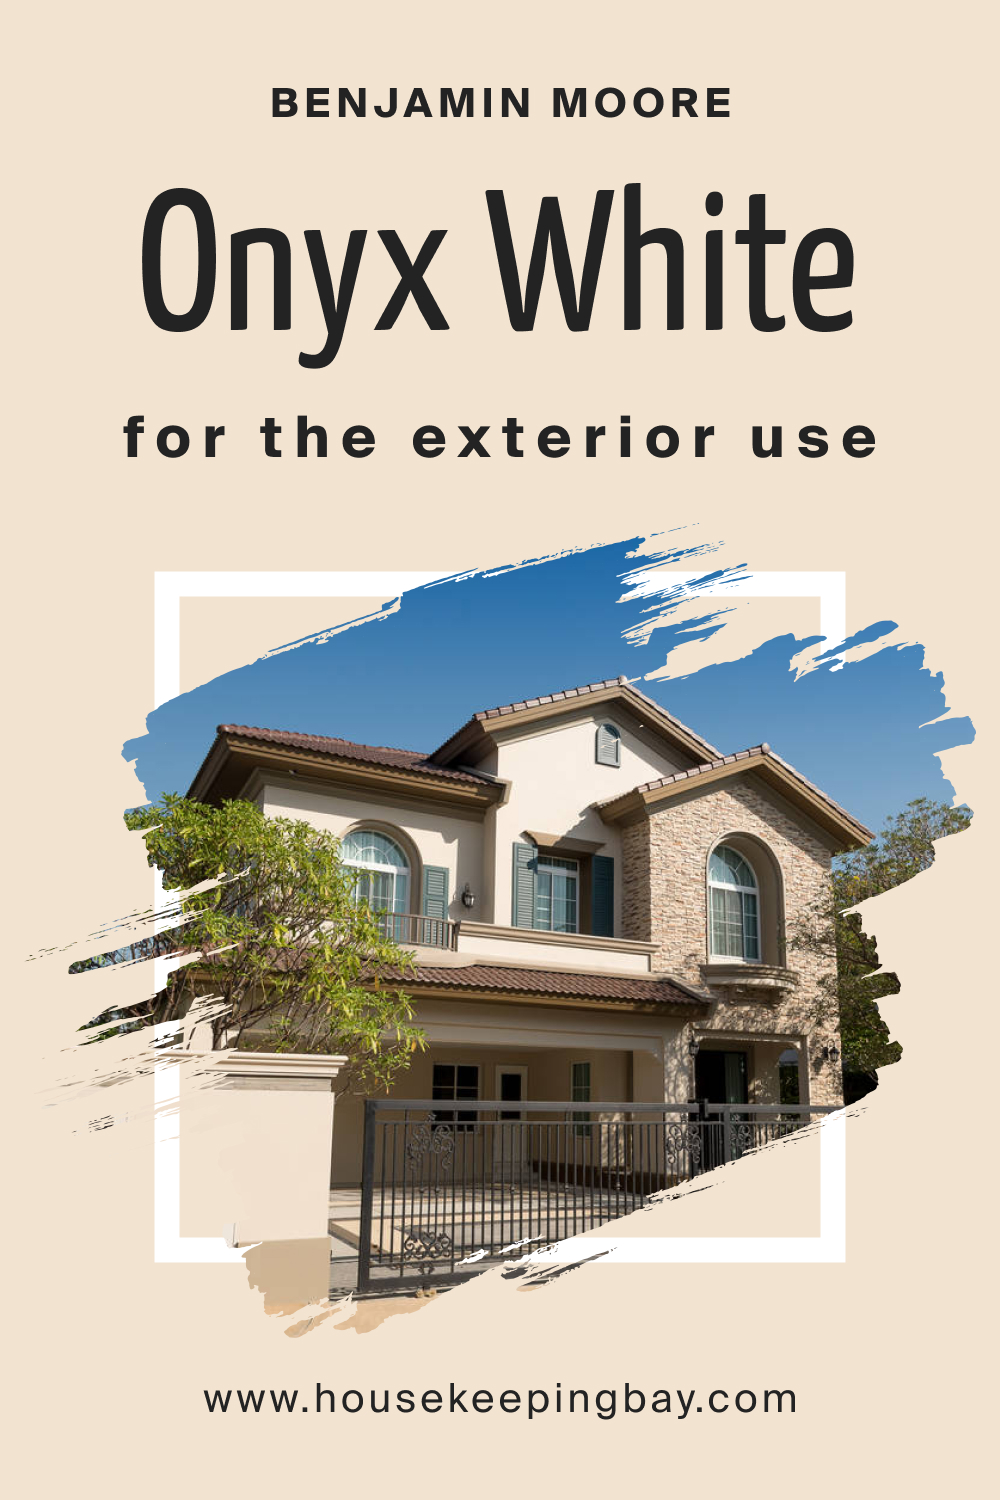 Benjamin Moore. Onyx White OC 74 for the Exterior Use